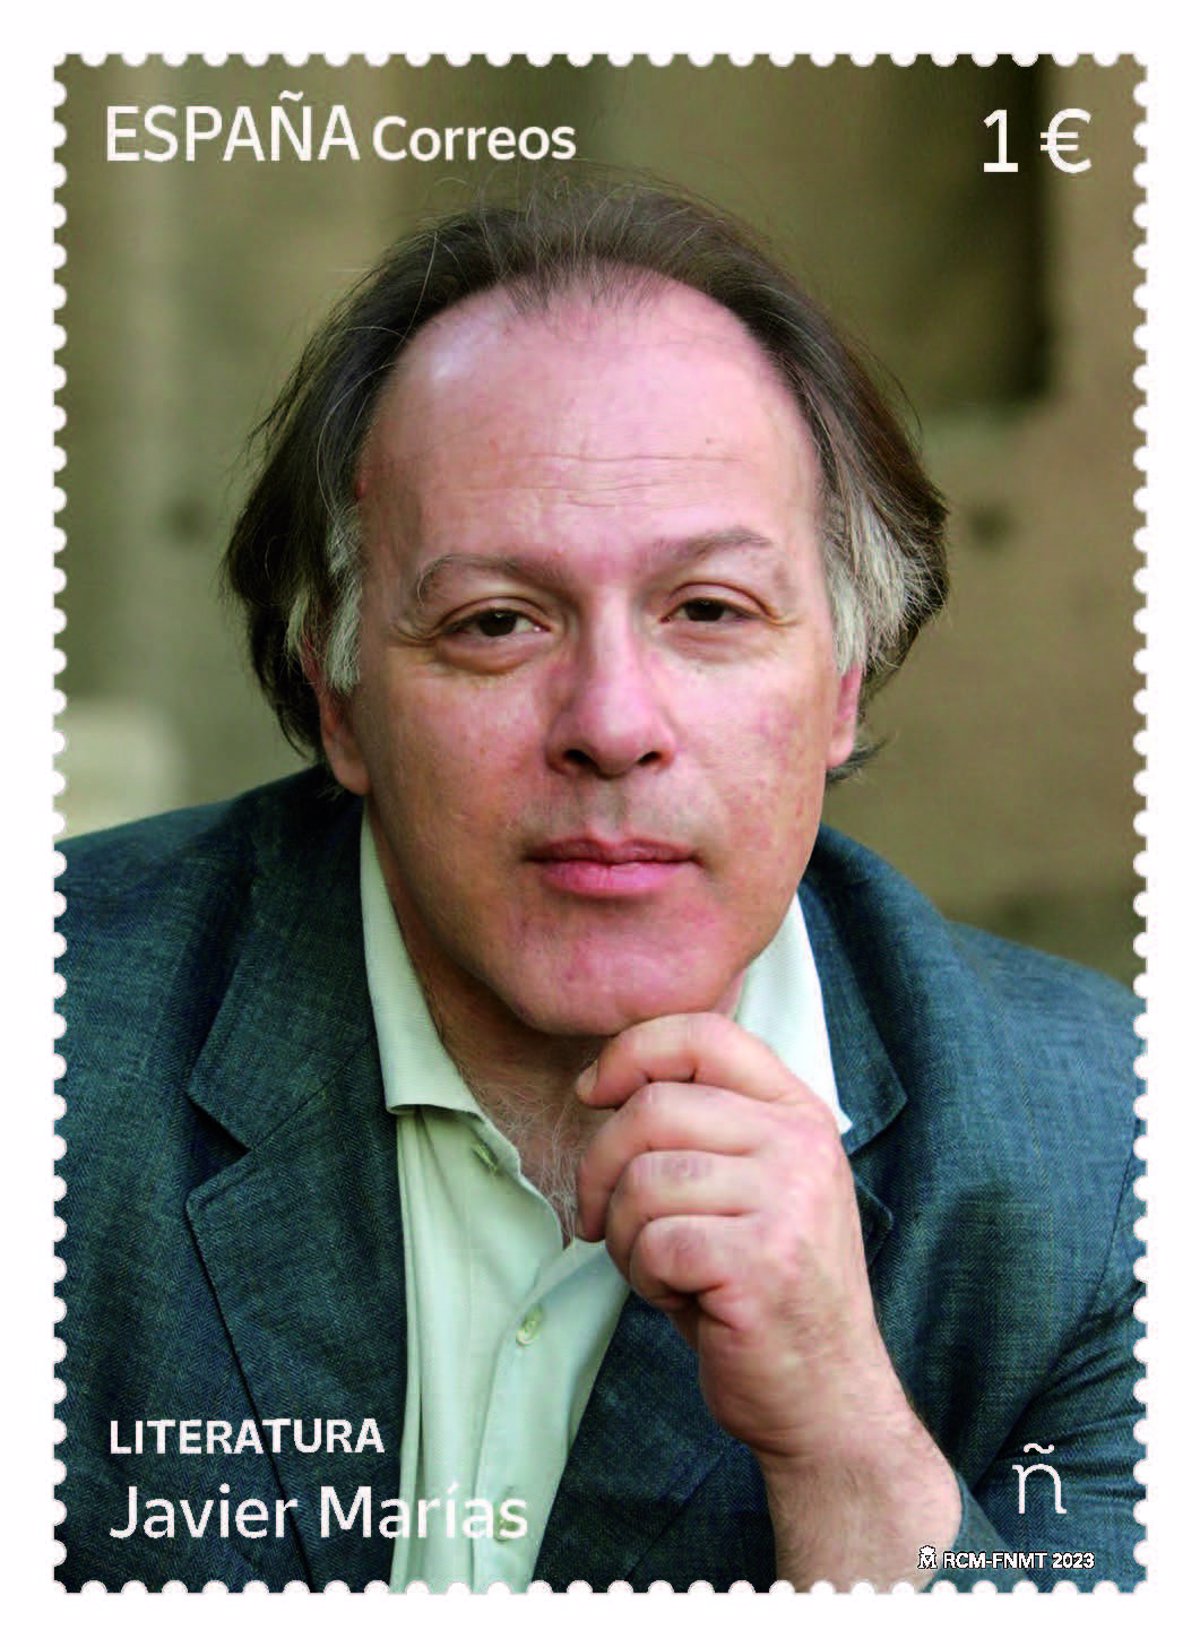 Correos issues a stamp dedicated to the writer Javier Marías